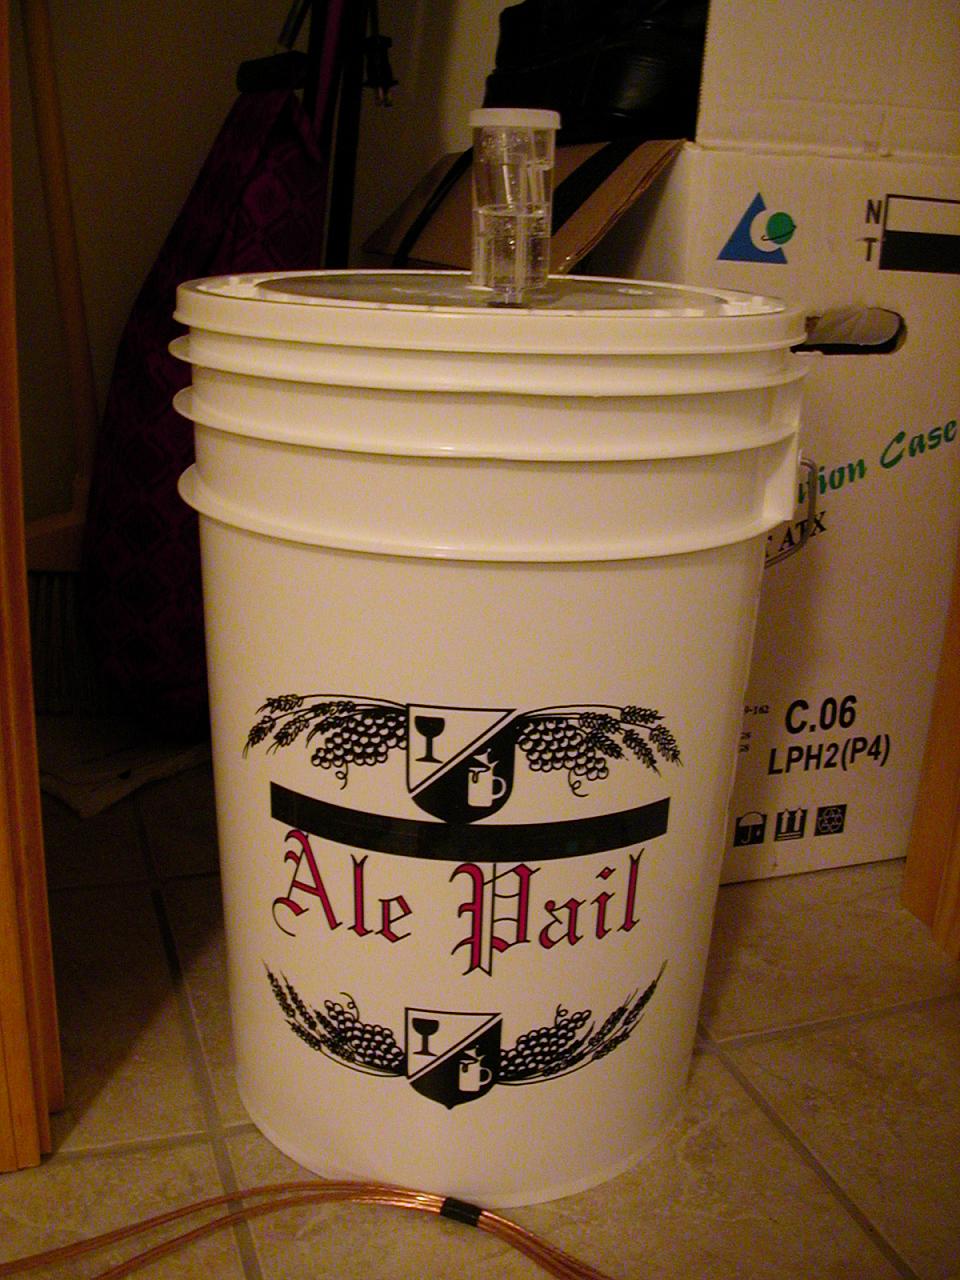 The primary fermentation bucket sitting in my closet with 5 gallons of wort becoming beer.